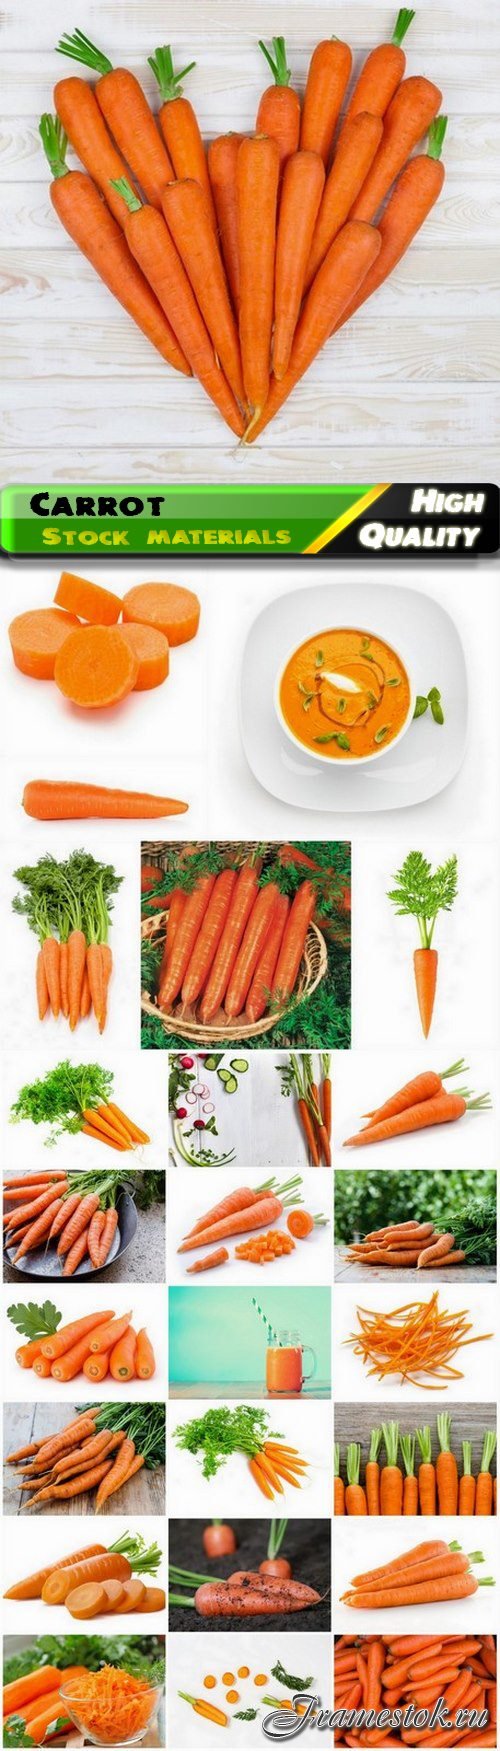 Carrot is genus of plants of the Umbilical family 25 HQ Jpg